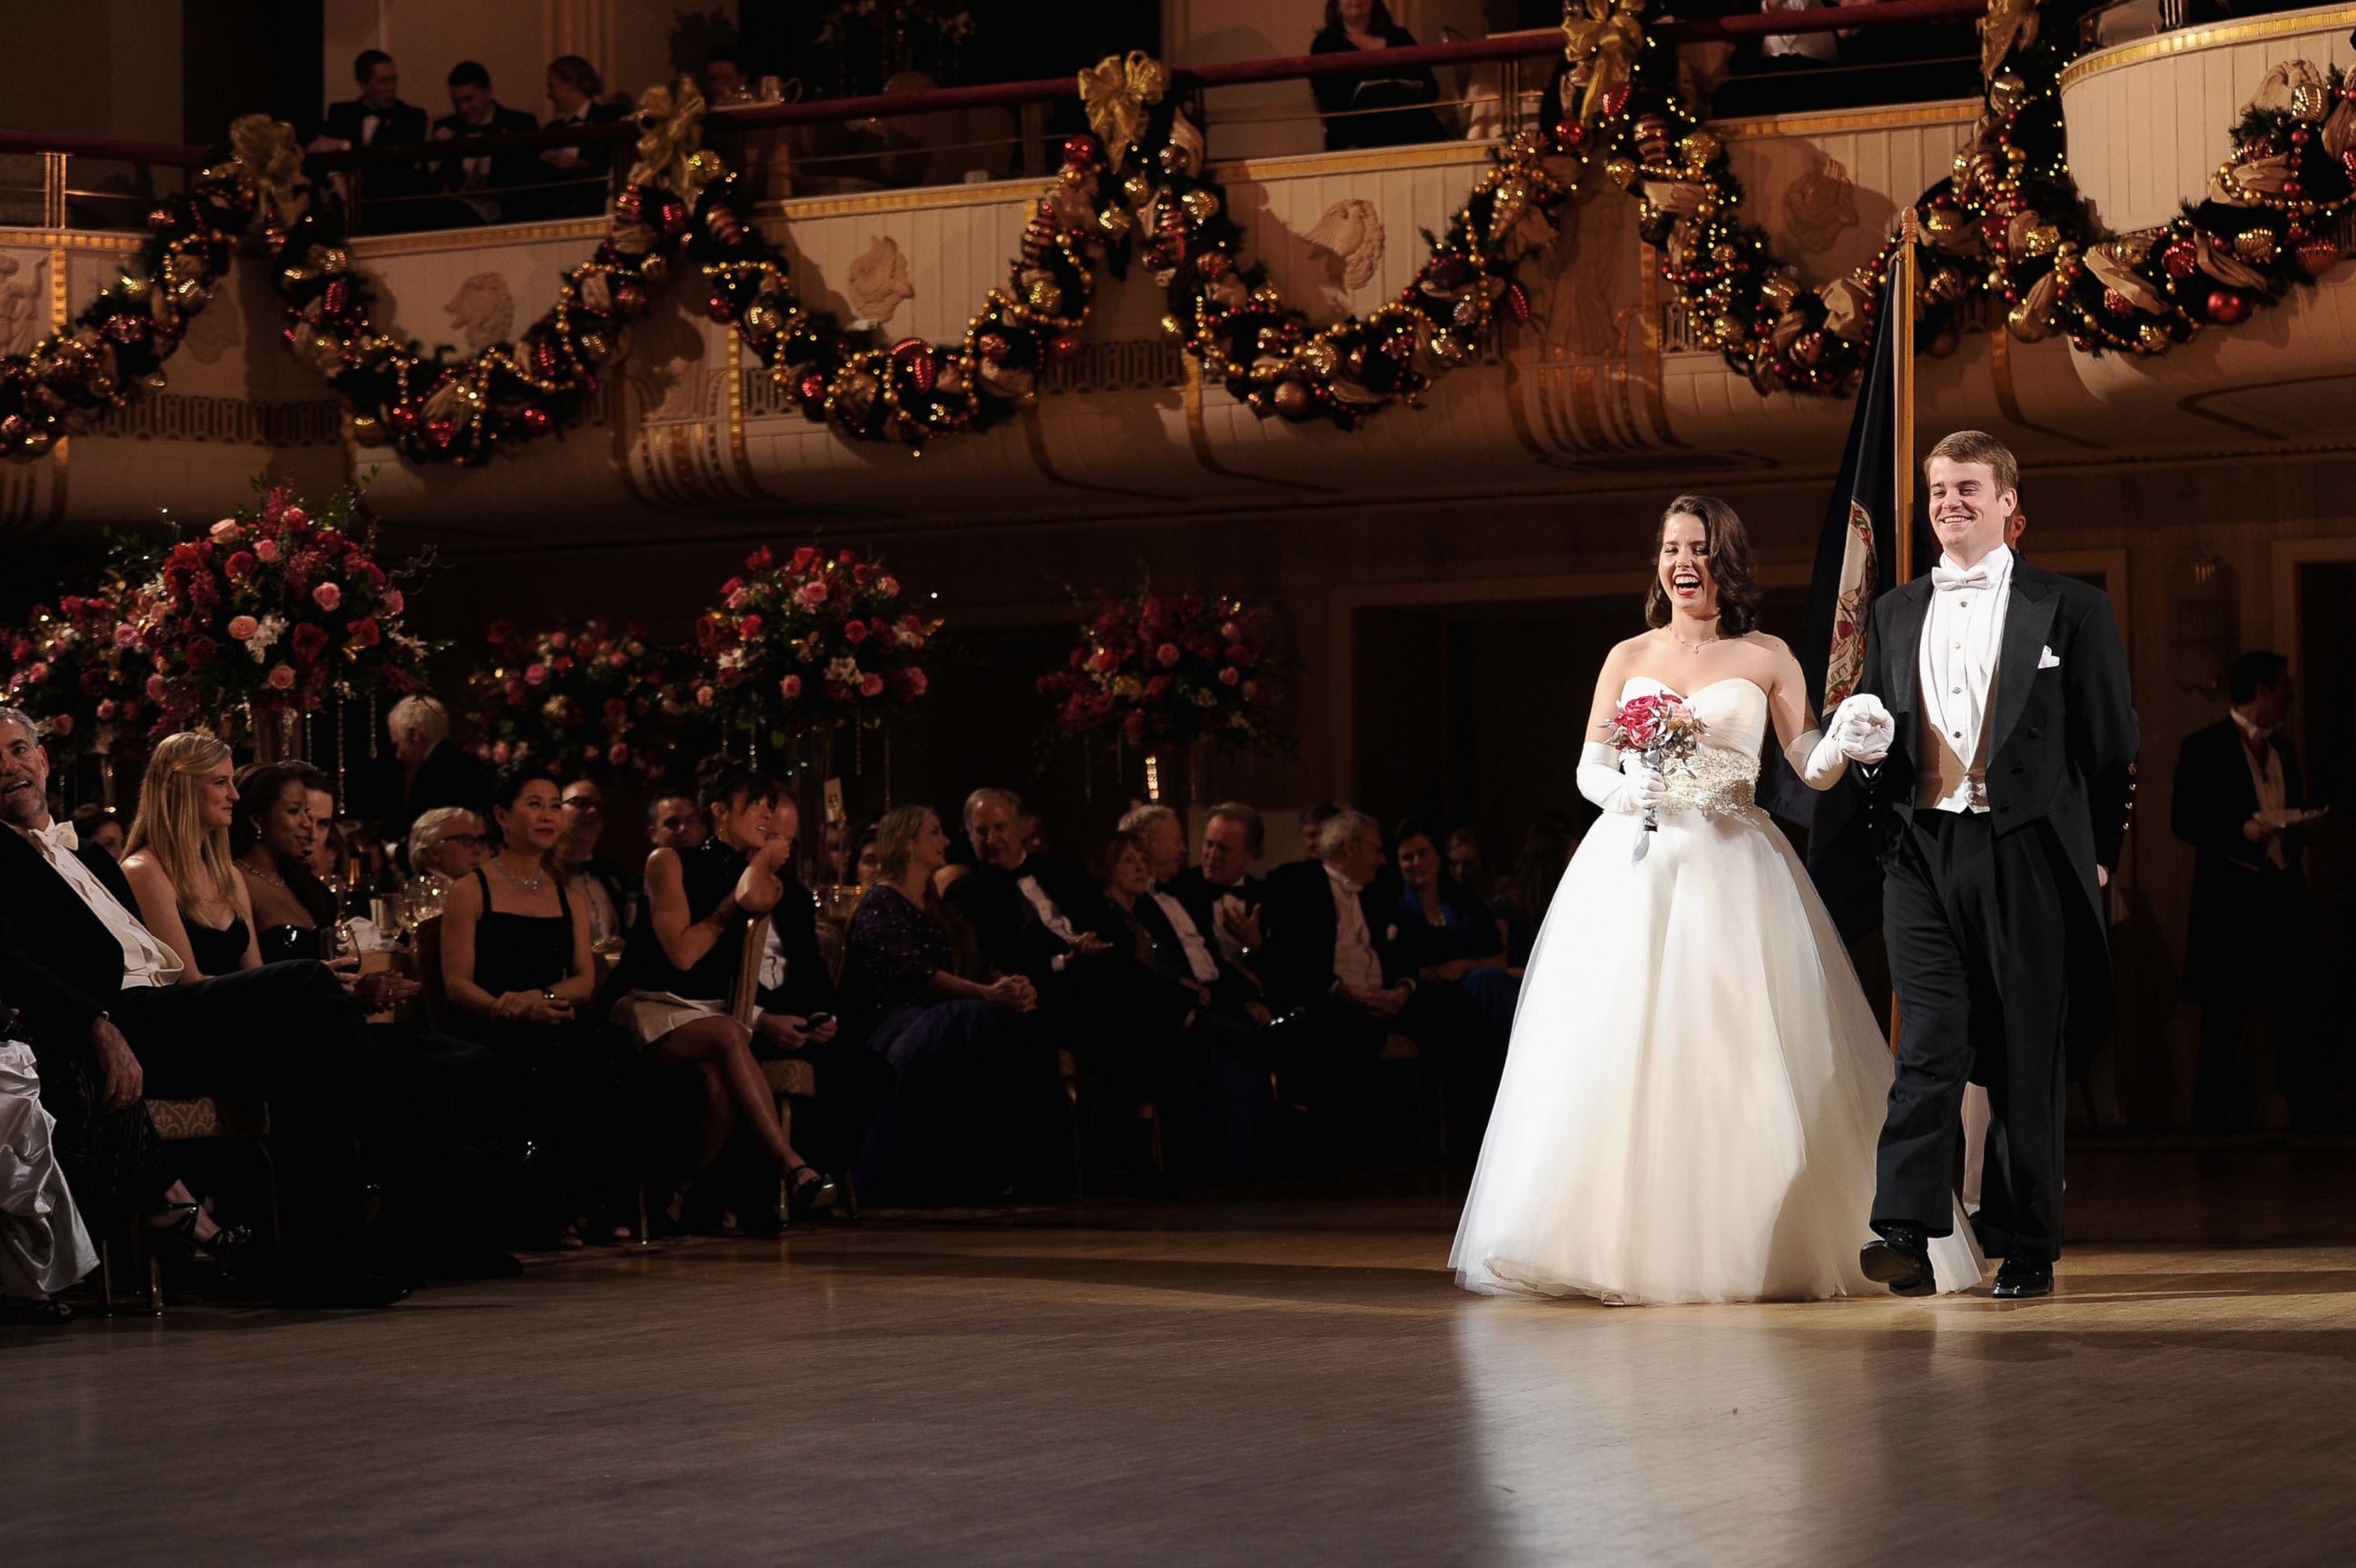 PHOTO: Debutante Sarah Mathison of Virginia attends the 60th International Debutante Ball at The Waldorf Astoria on Dec. 29, 2014 in New York City.